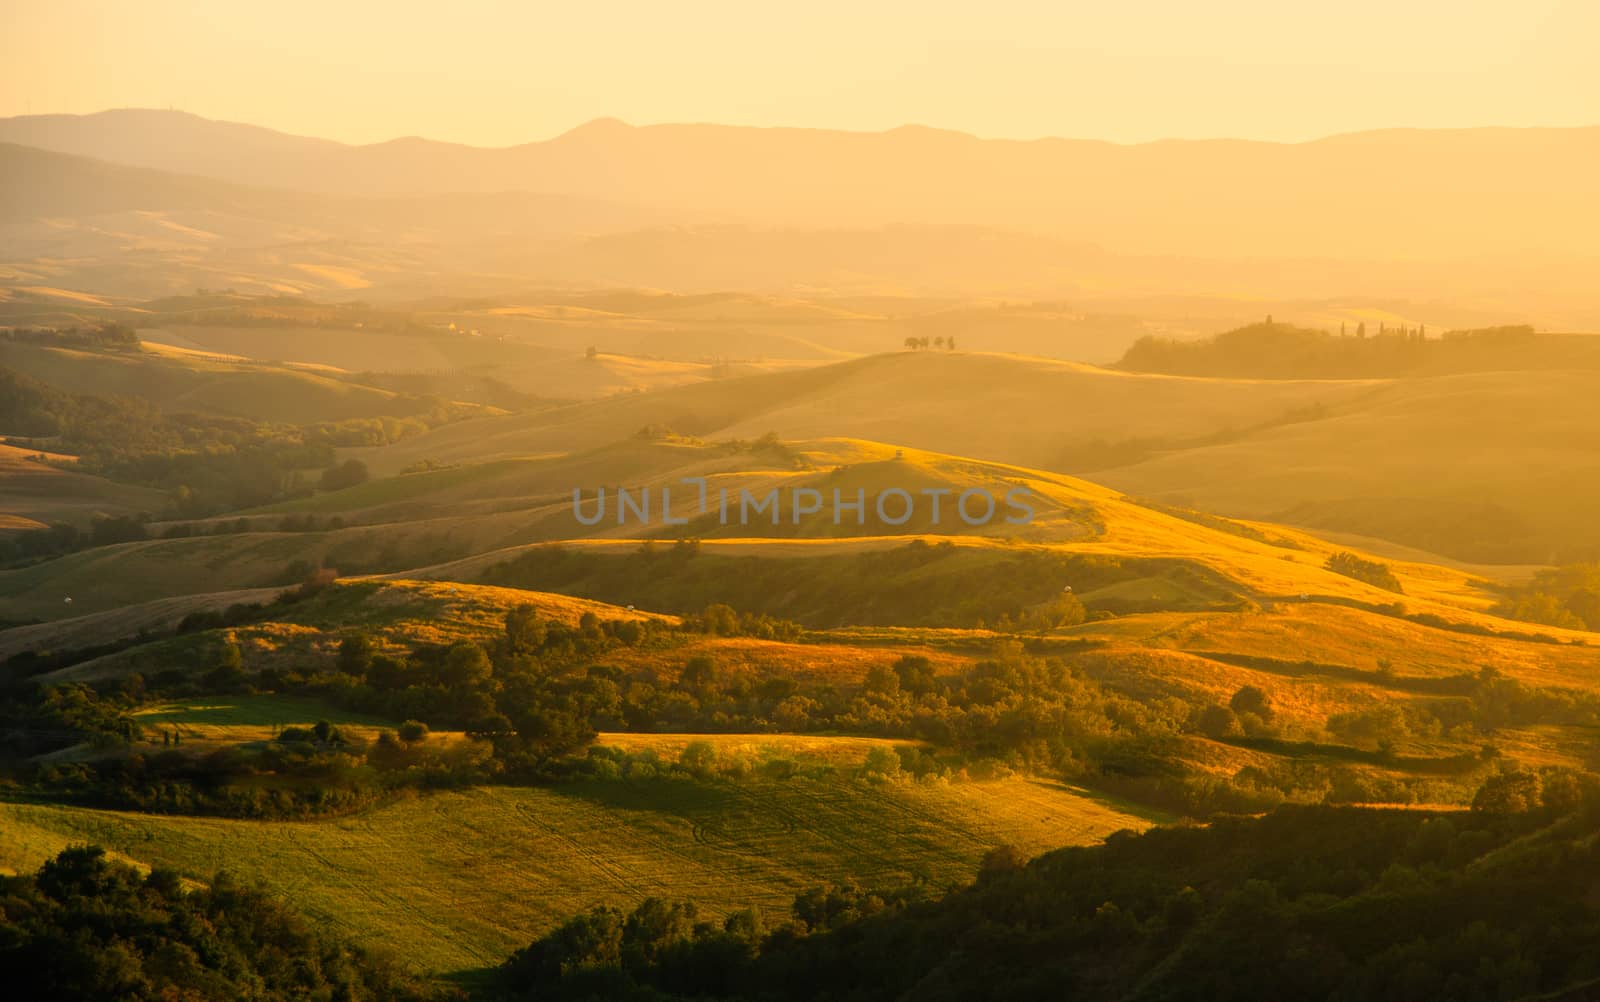 Evening in Tuscany. Hilly Tuscan landscape in golden mood at sunset time with silhouettes of cypresses and farm houses near Montaione, Italy by pyty